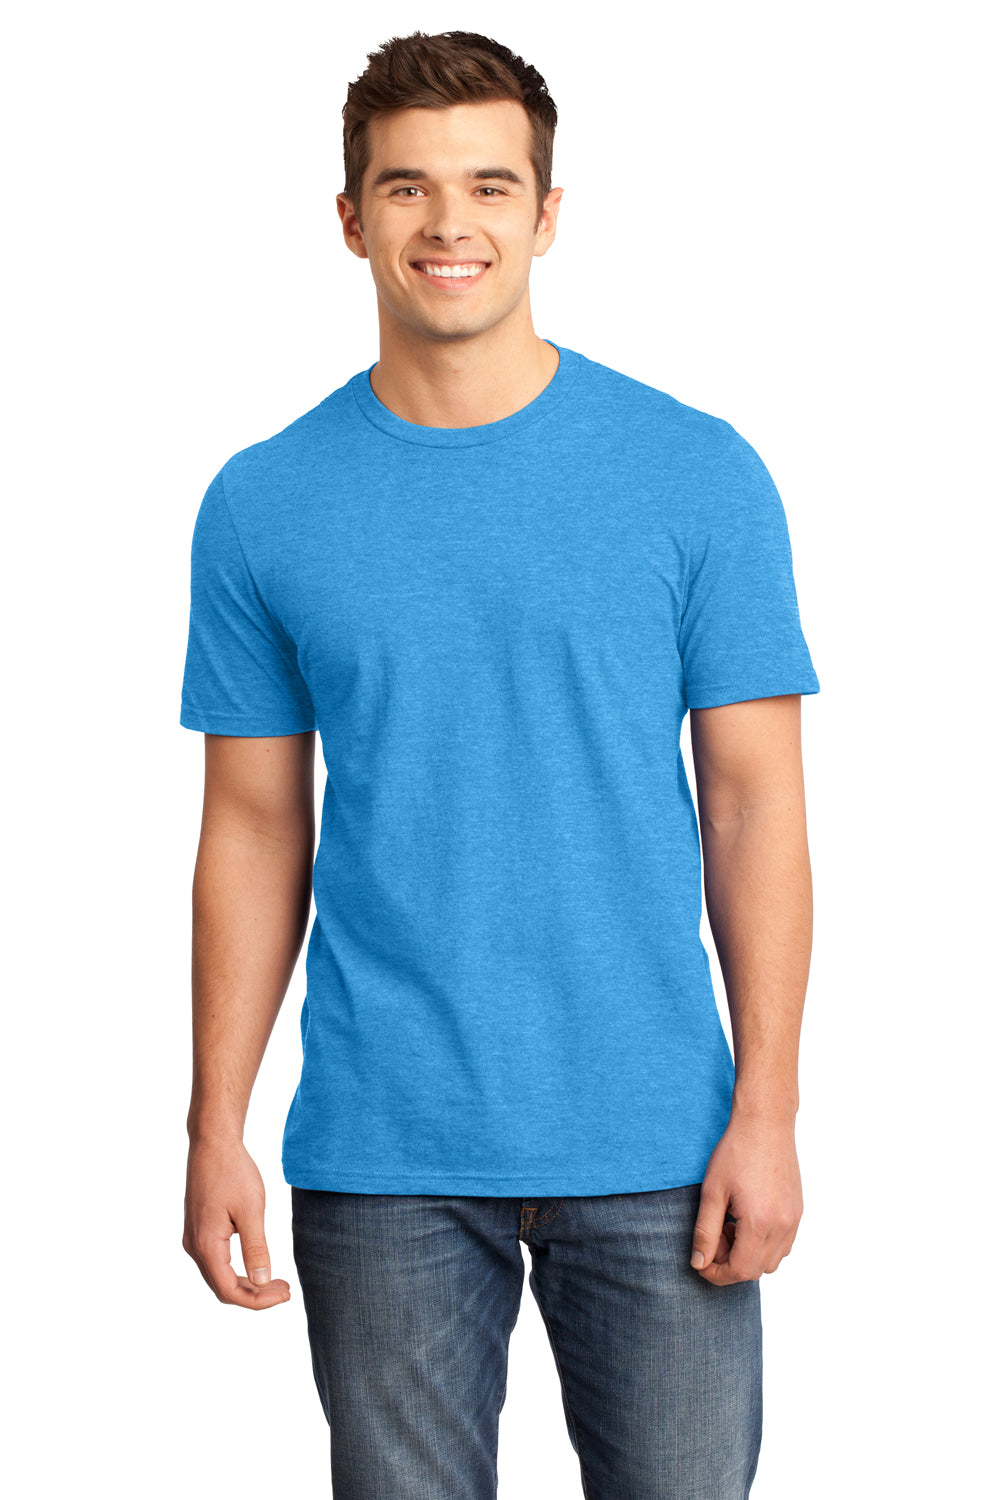 District DT6000 Mens Very Important Short Sleeve Crewneck T-Shirt Heather Turquoise Blue Front